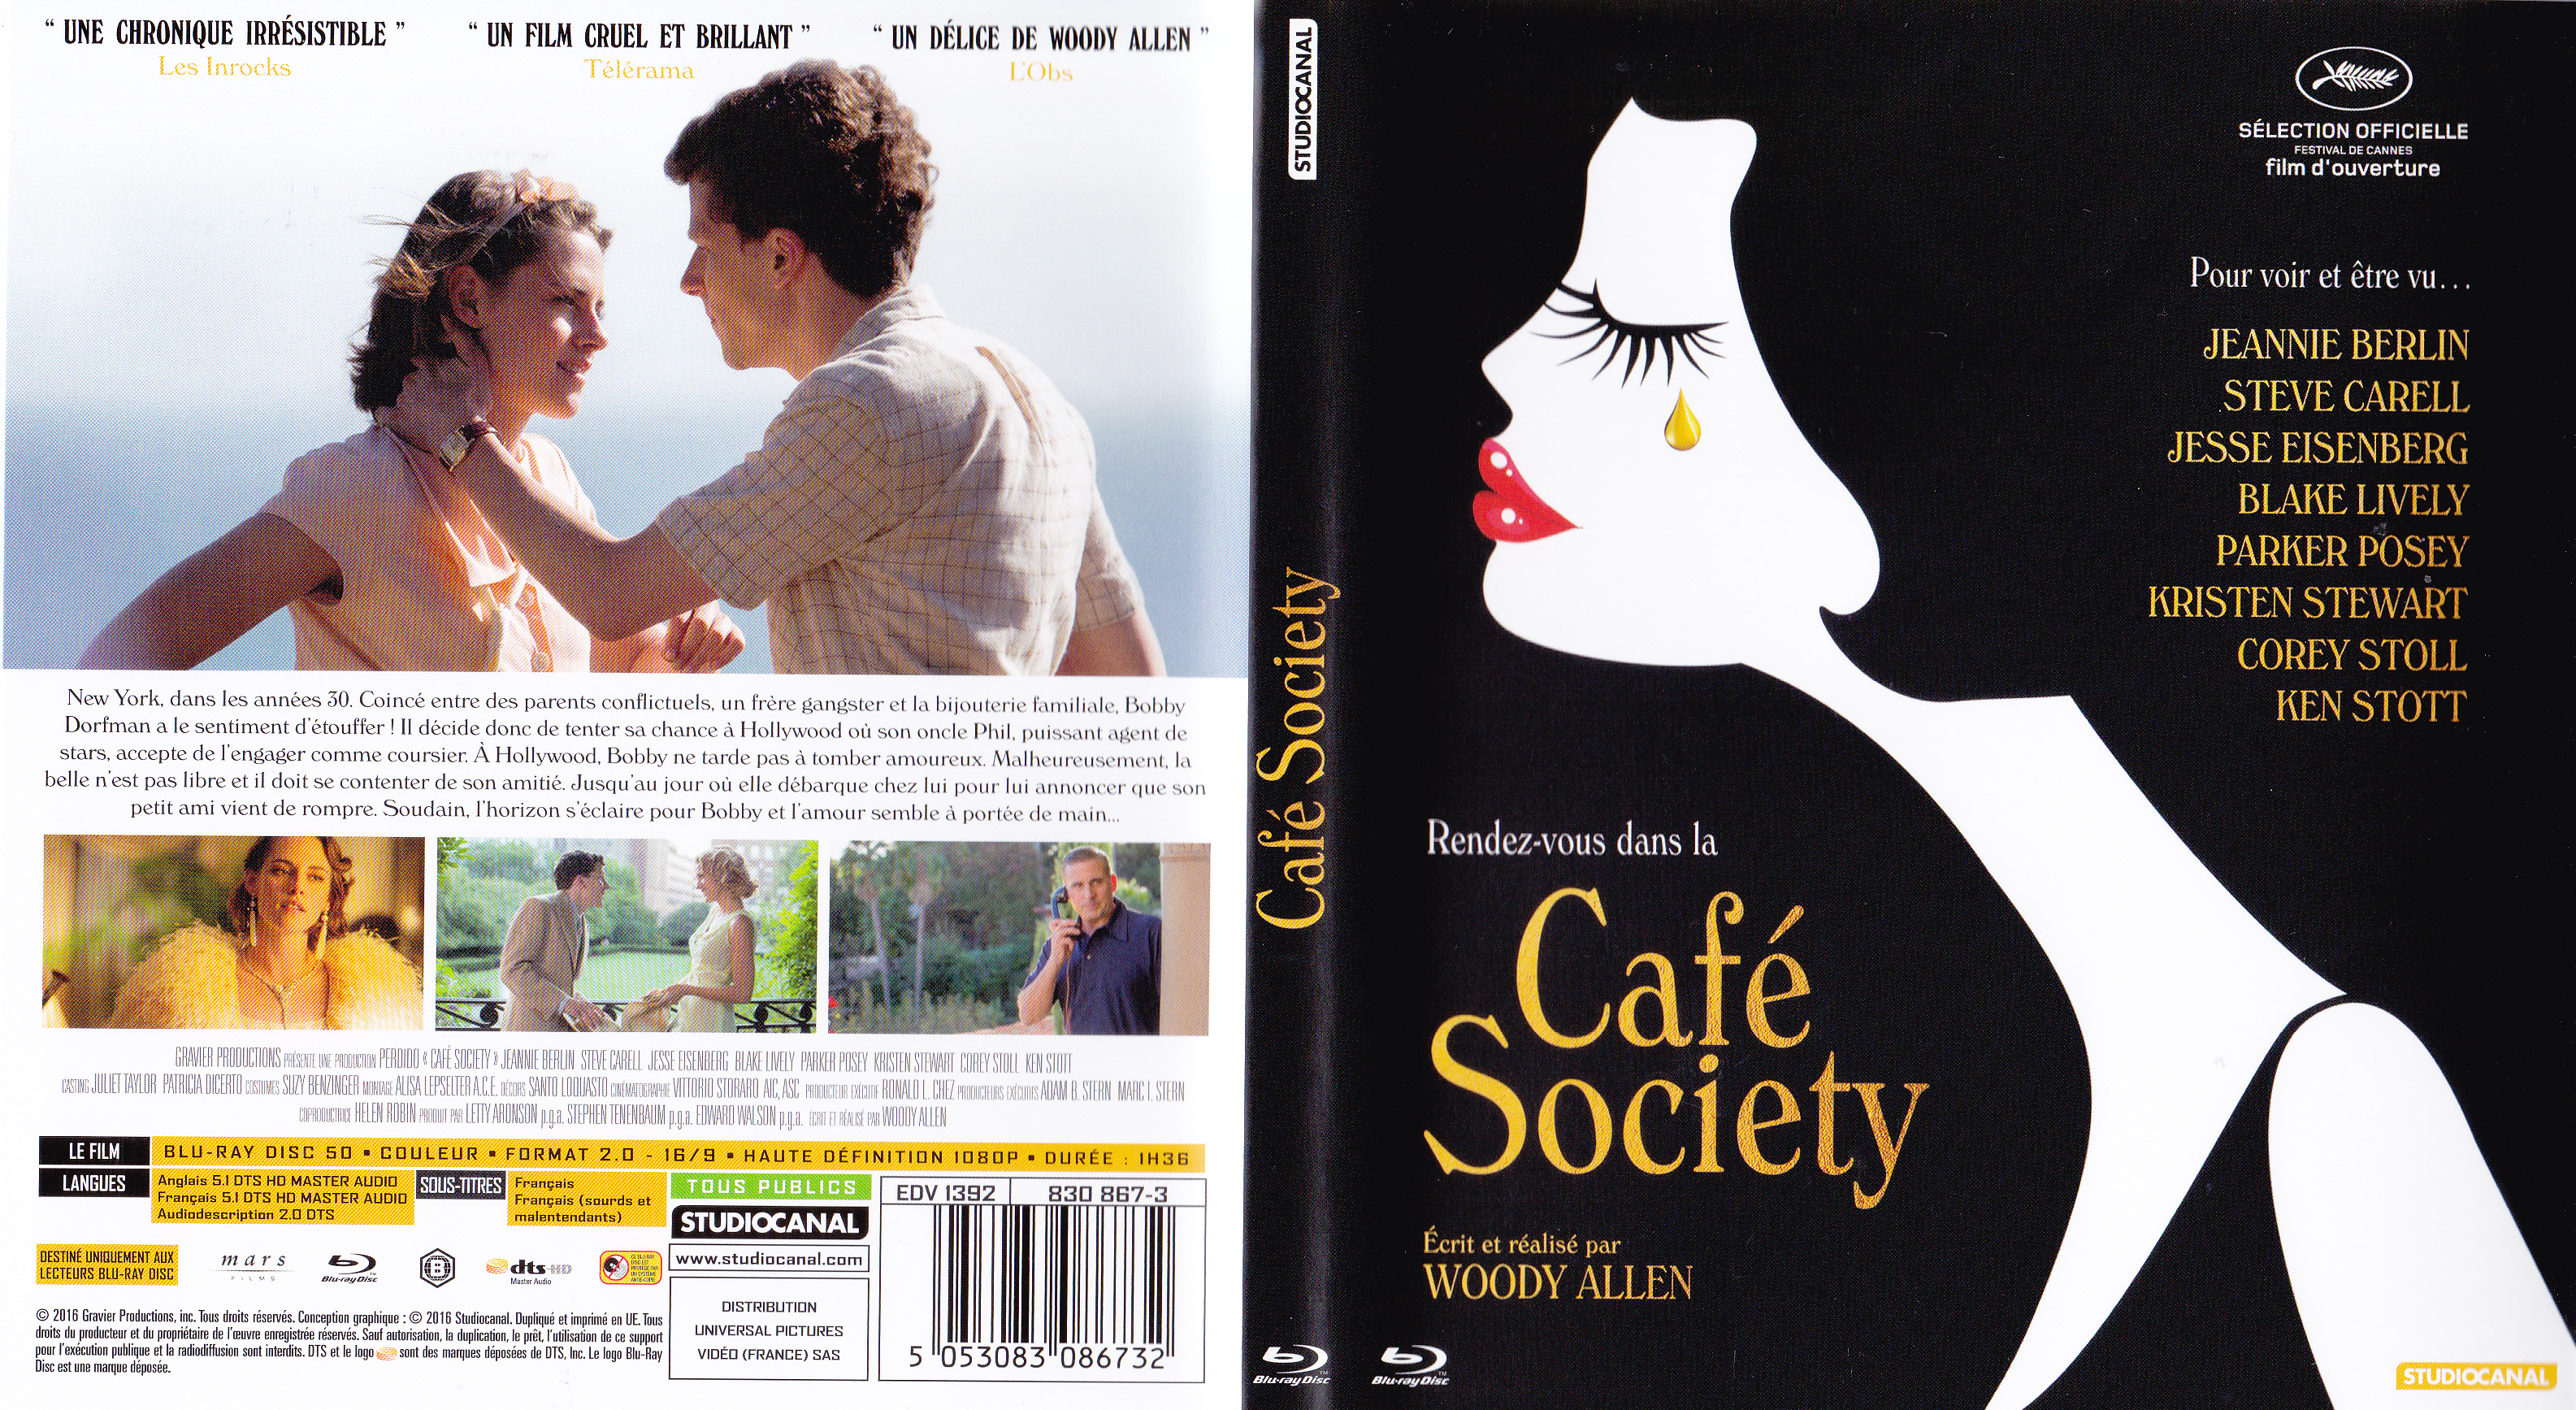 Jaquette DVD Cafe Society (BLU-RAY)